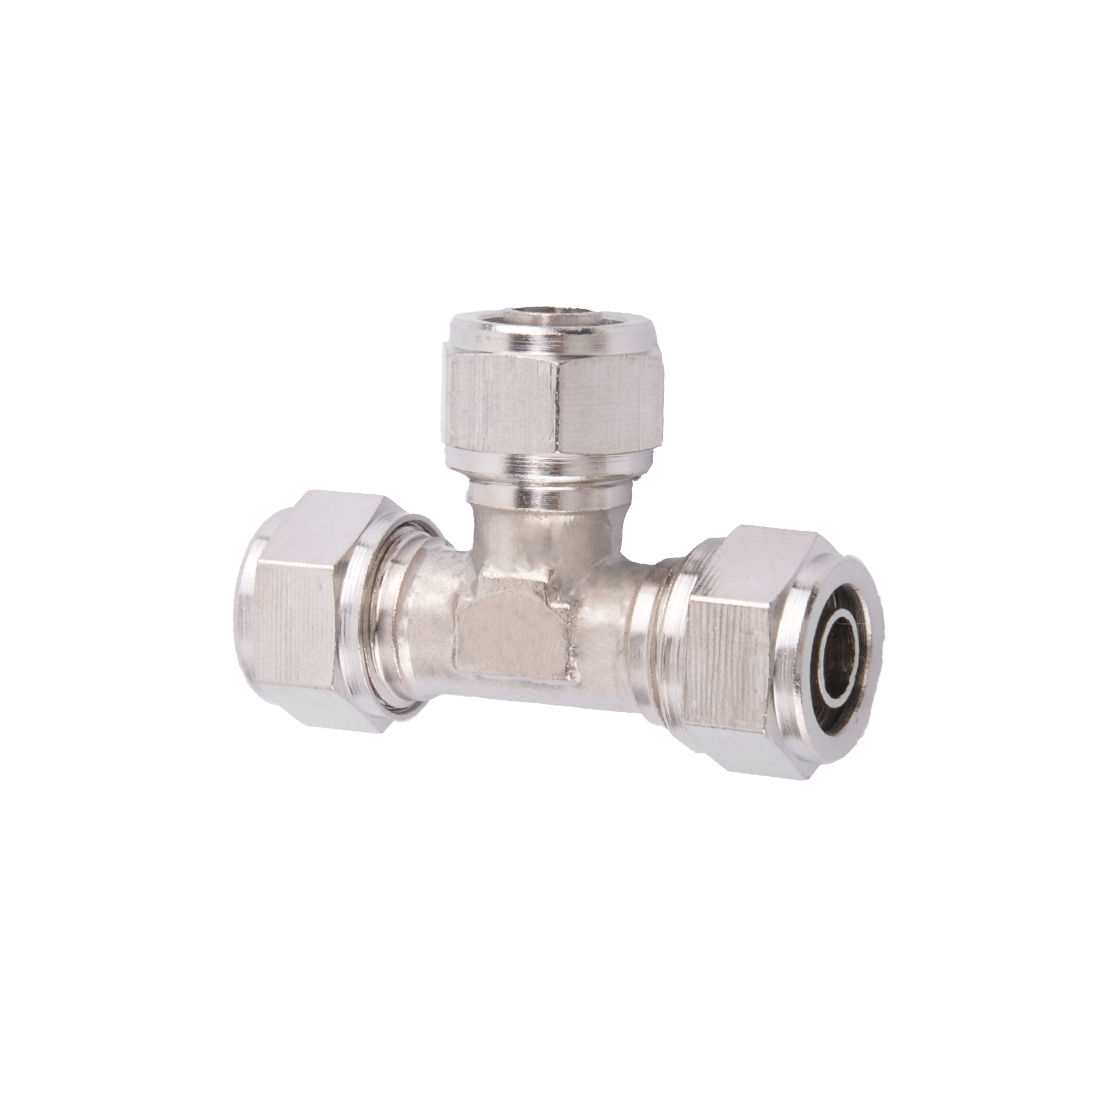 Ang SNS KLE Series nga pipe fitting pneumatic brass quick coupling three way fitting